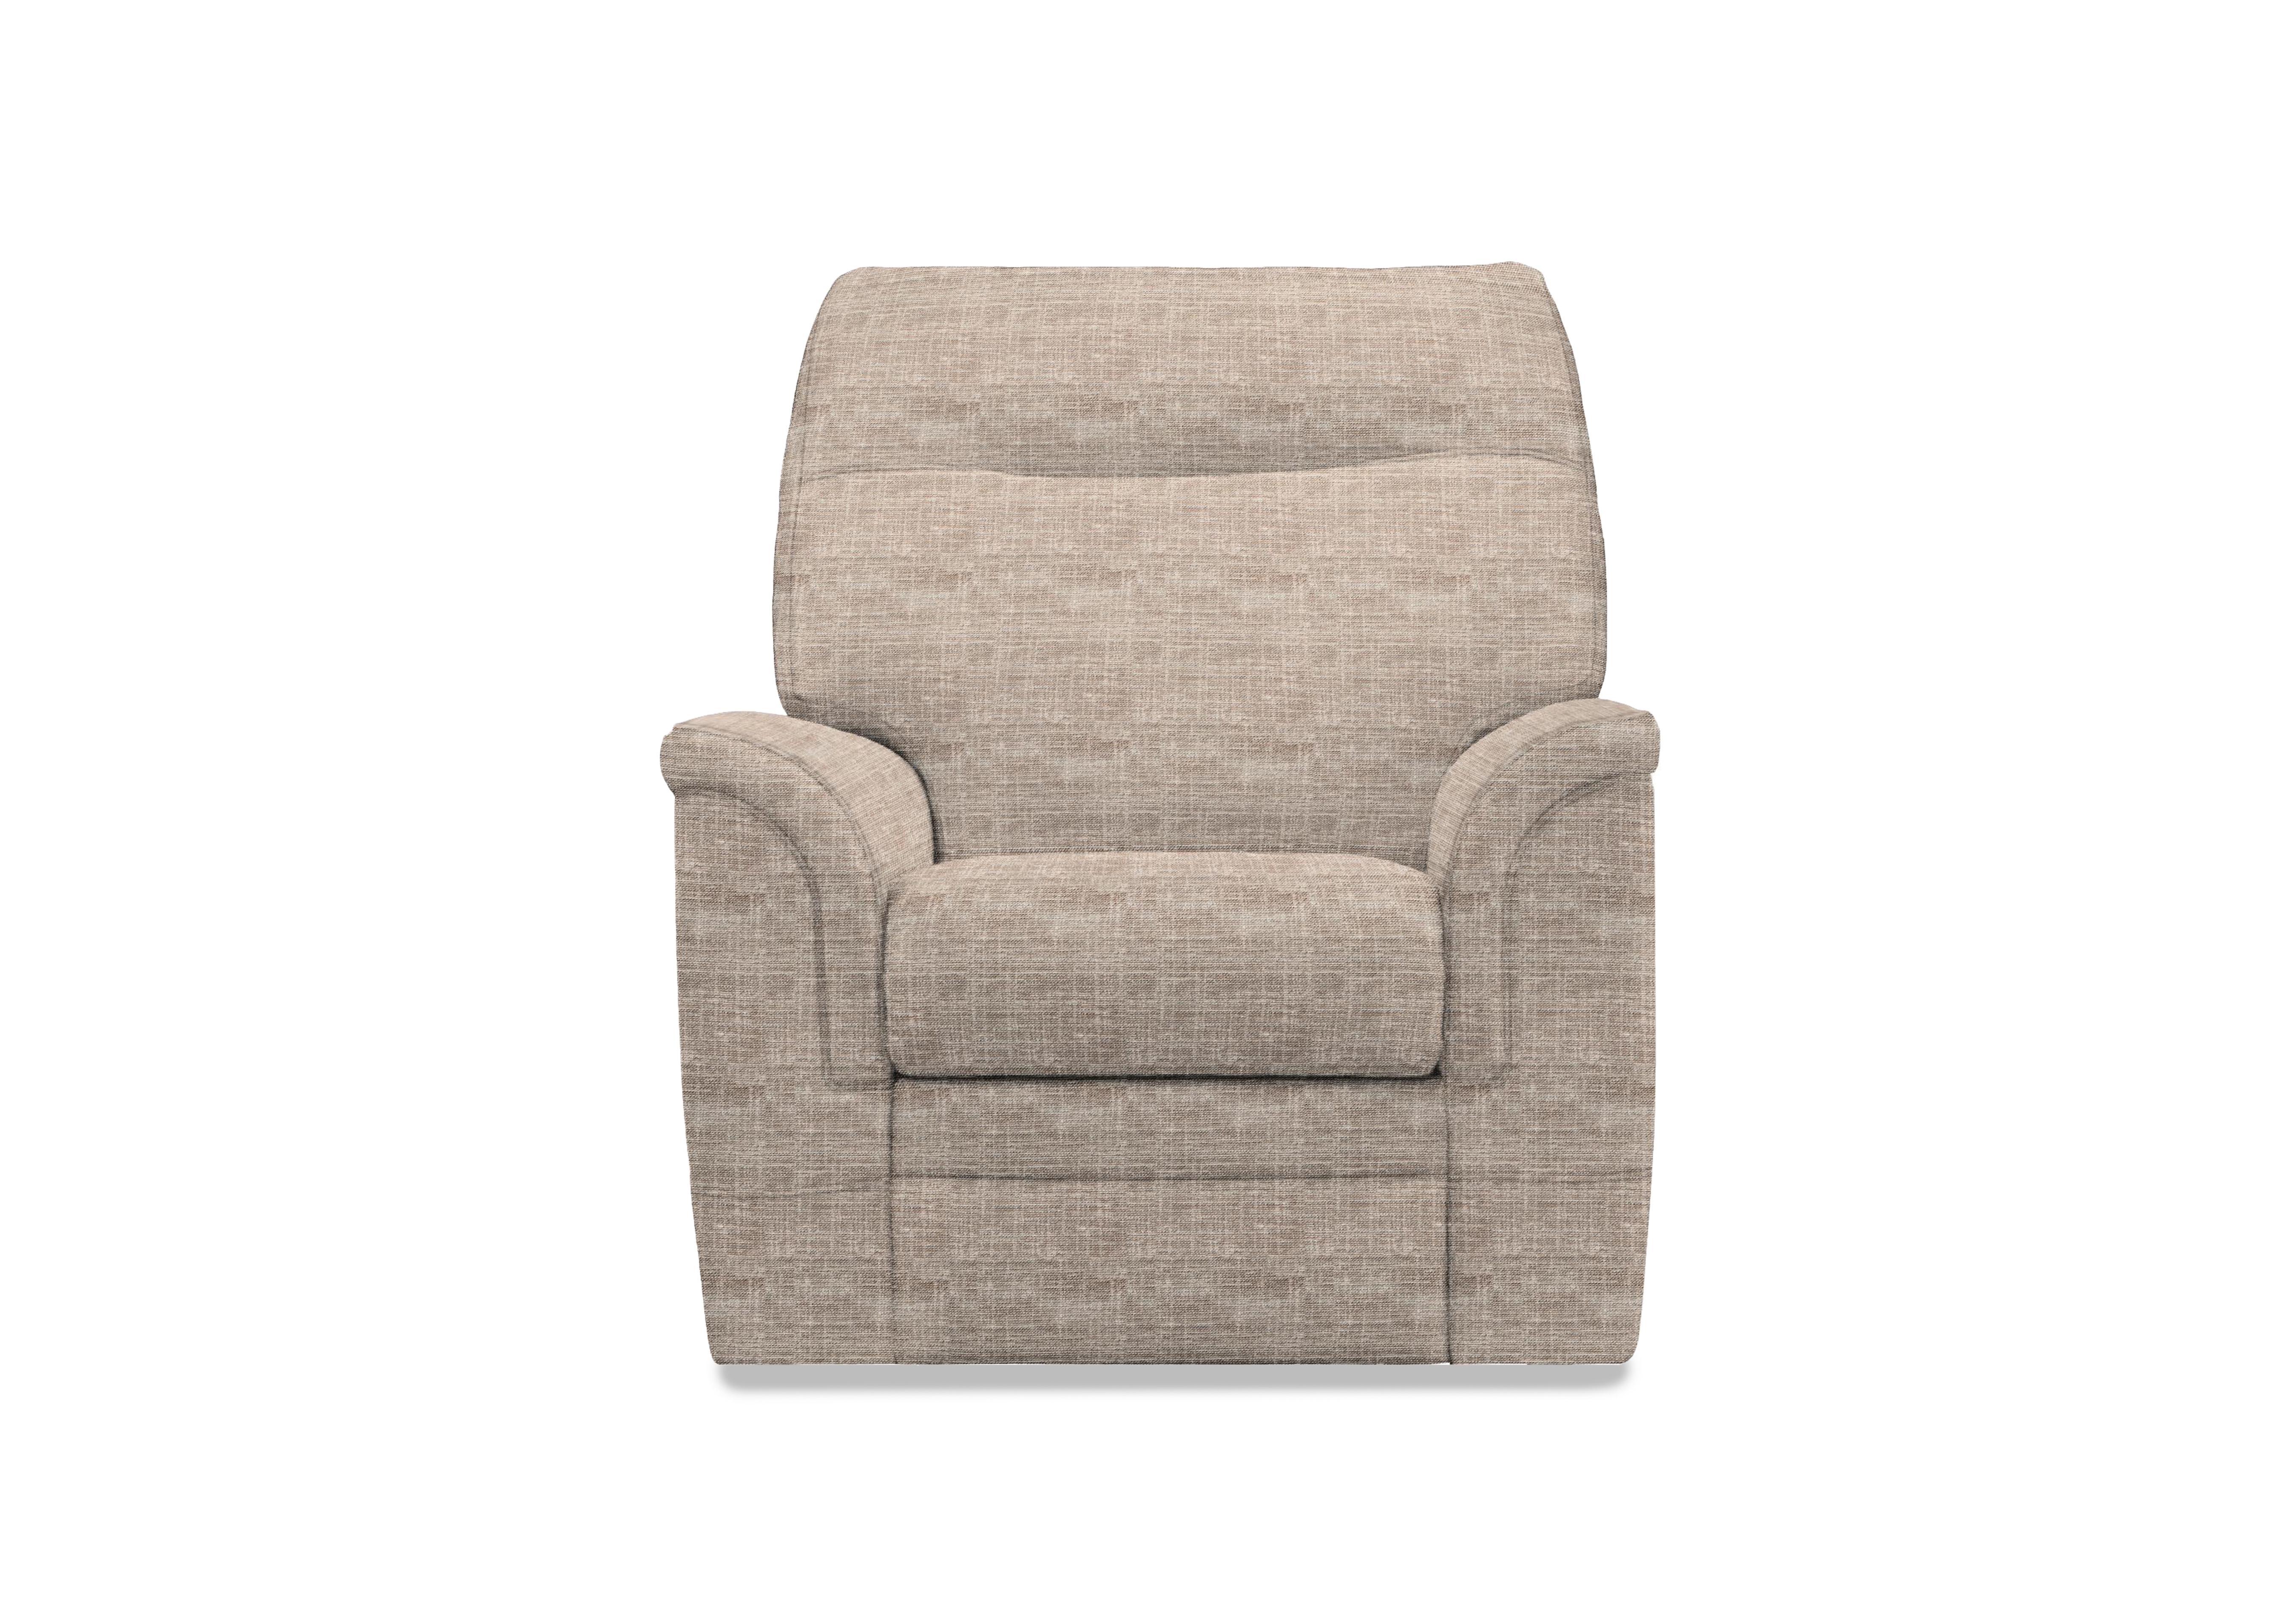 Hudson 23 Fabric Lift and Rise Chair in Dash Oatmeal 001497-0051 on Furniture Village